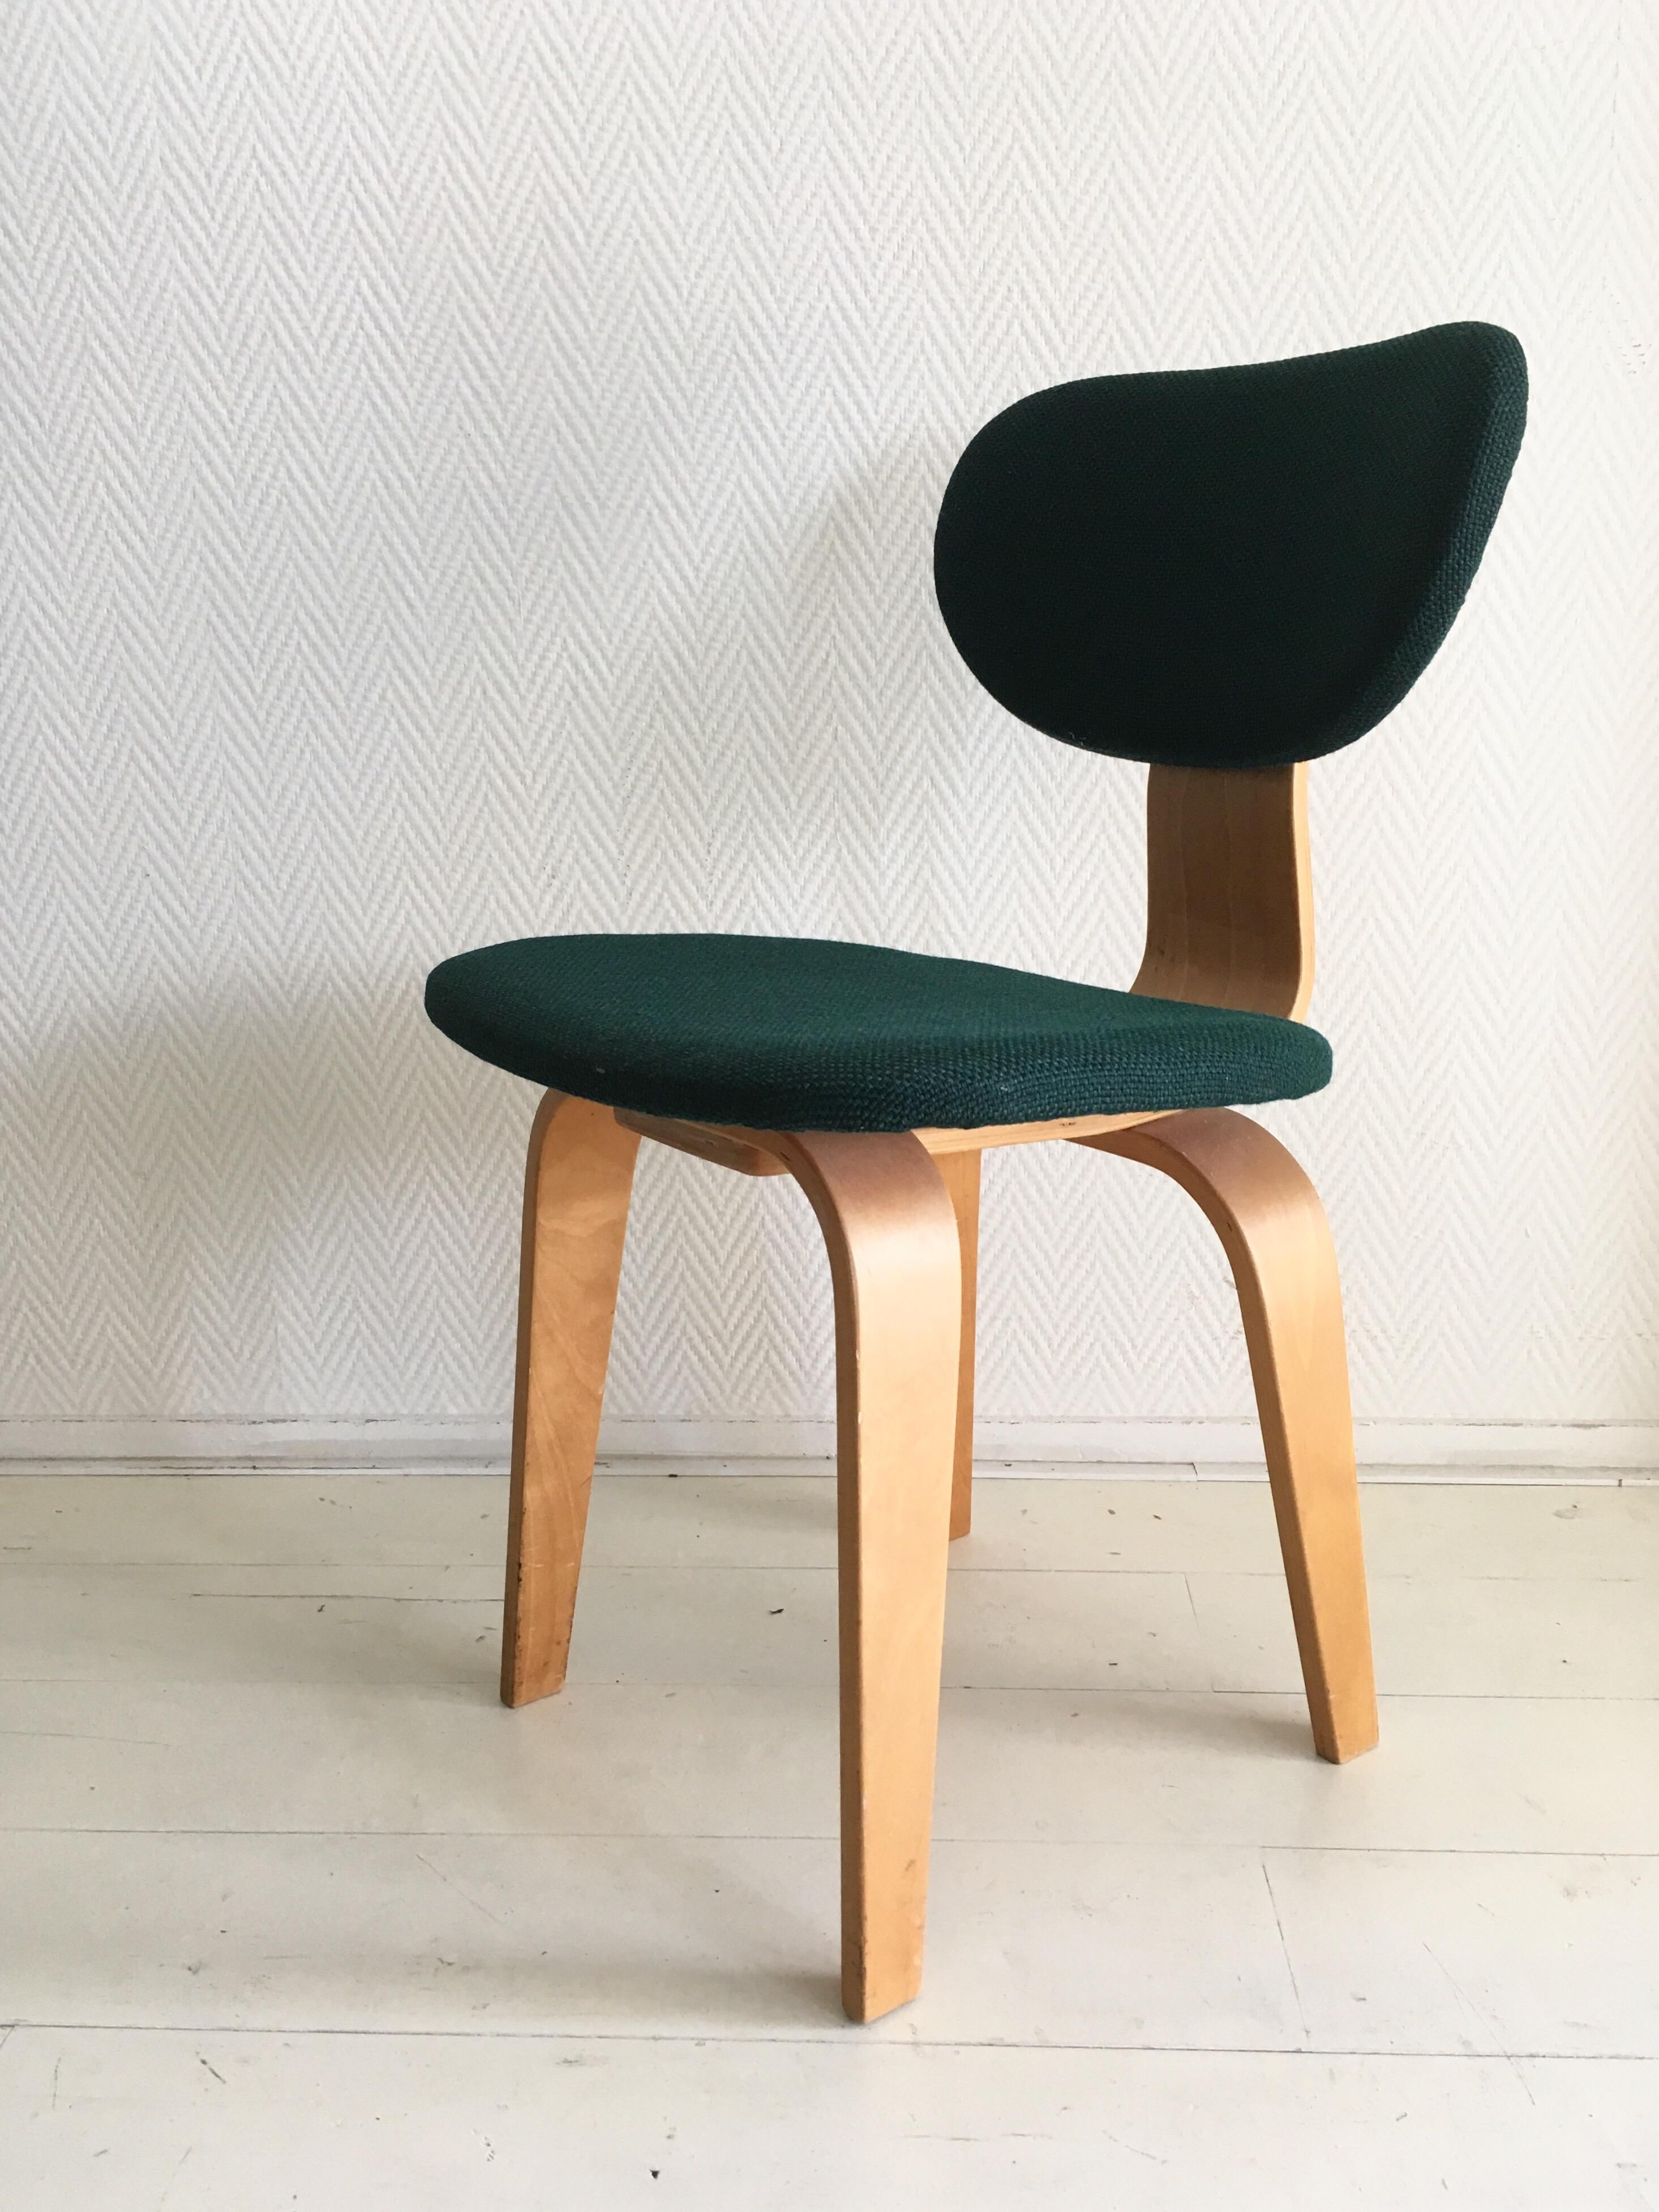 Dutch Set of Two Cees Braakman Dining Chairs for Pastoe, Model SB02, 1950s For Sale